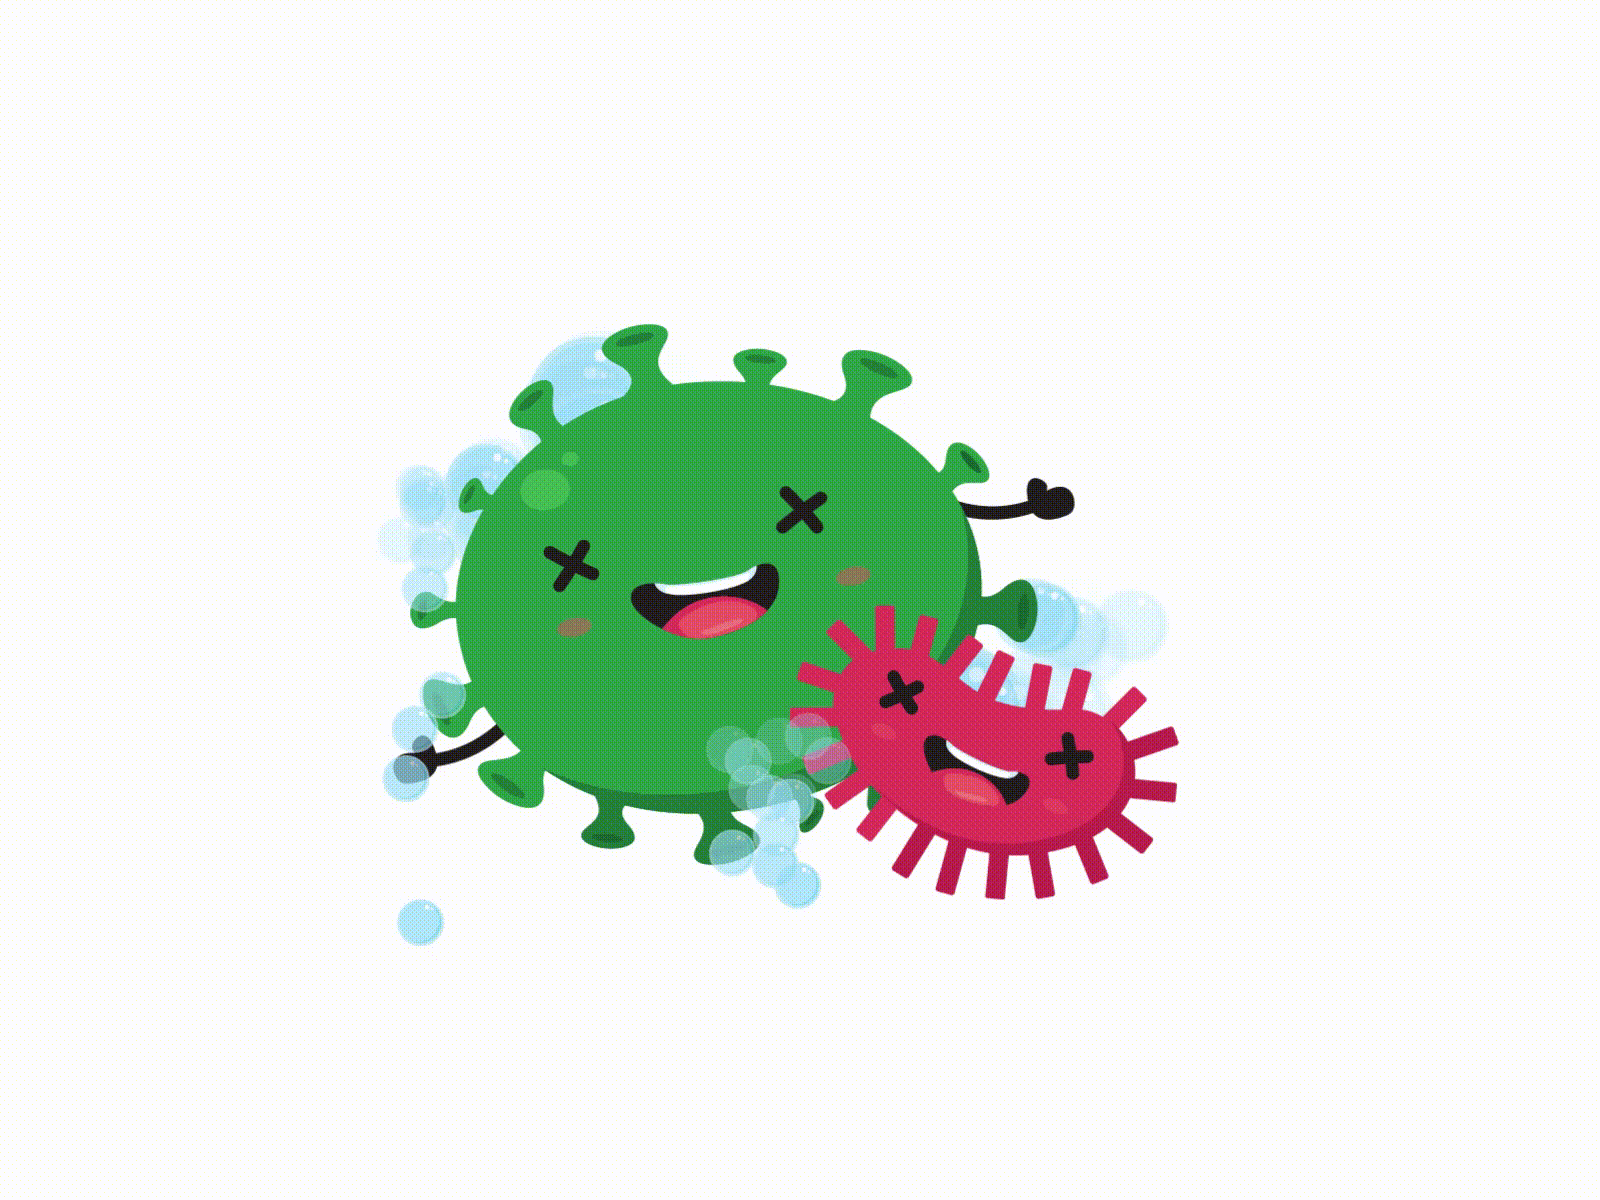 Bacteria character animated gif animation concept design graphic design illustration package packagedesign